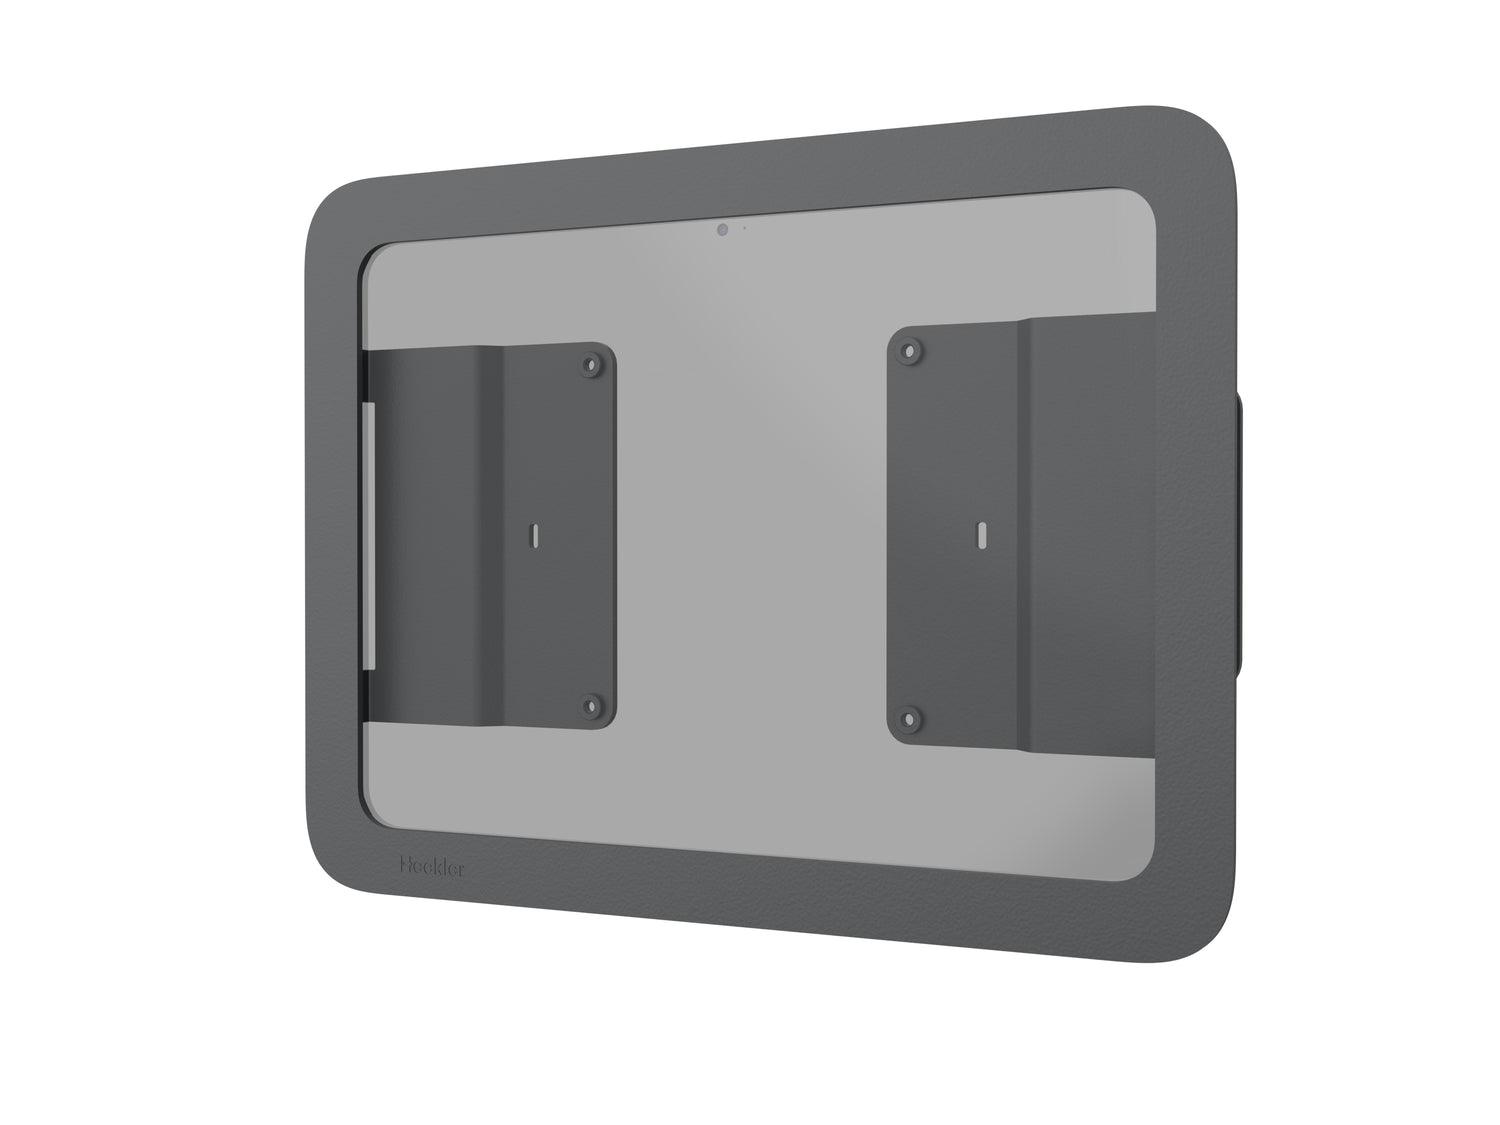 Case and VESA Mount for iPad